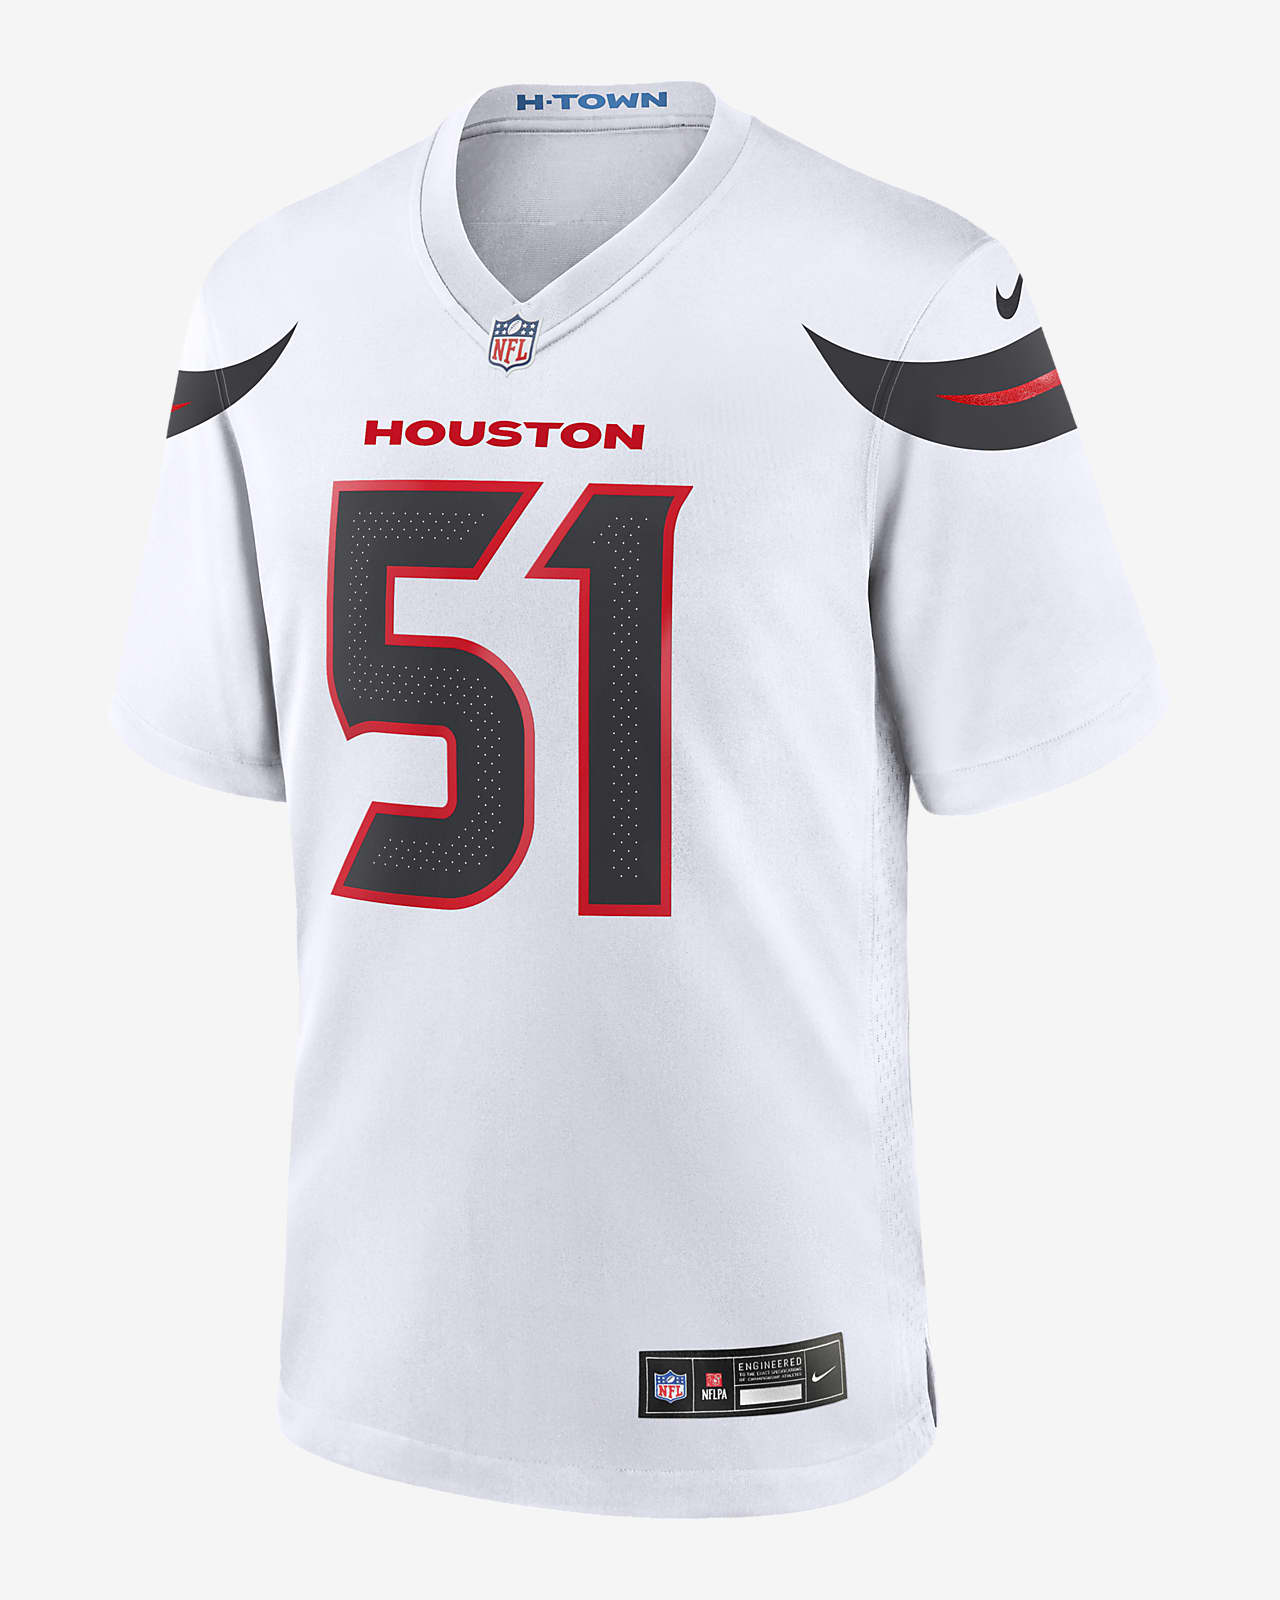 Will Anderson Jr. Houston Texans Men's Nike NFL Game Football Jersey